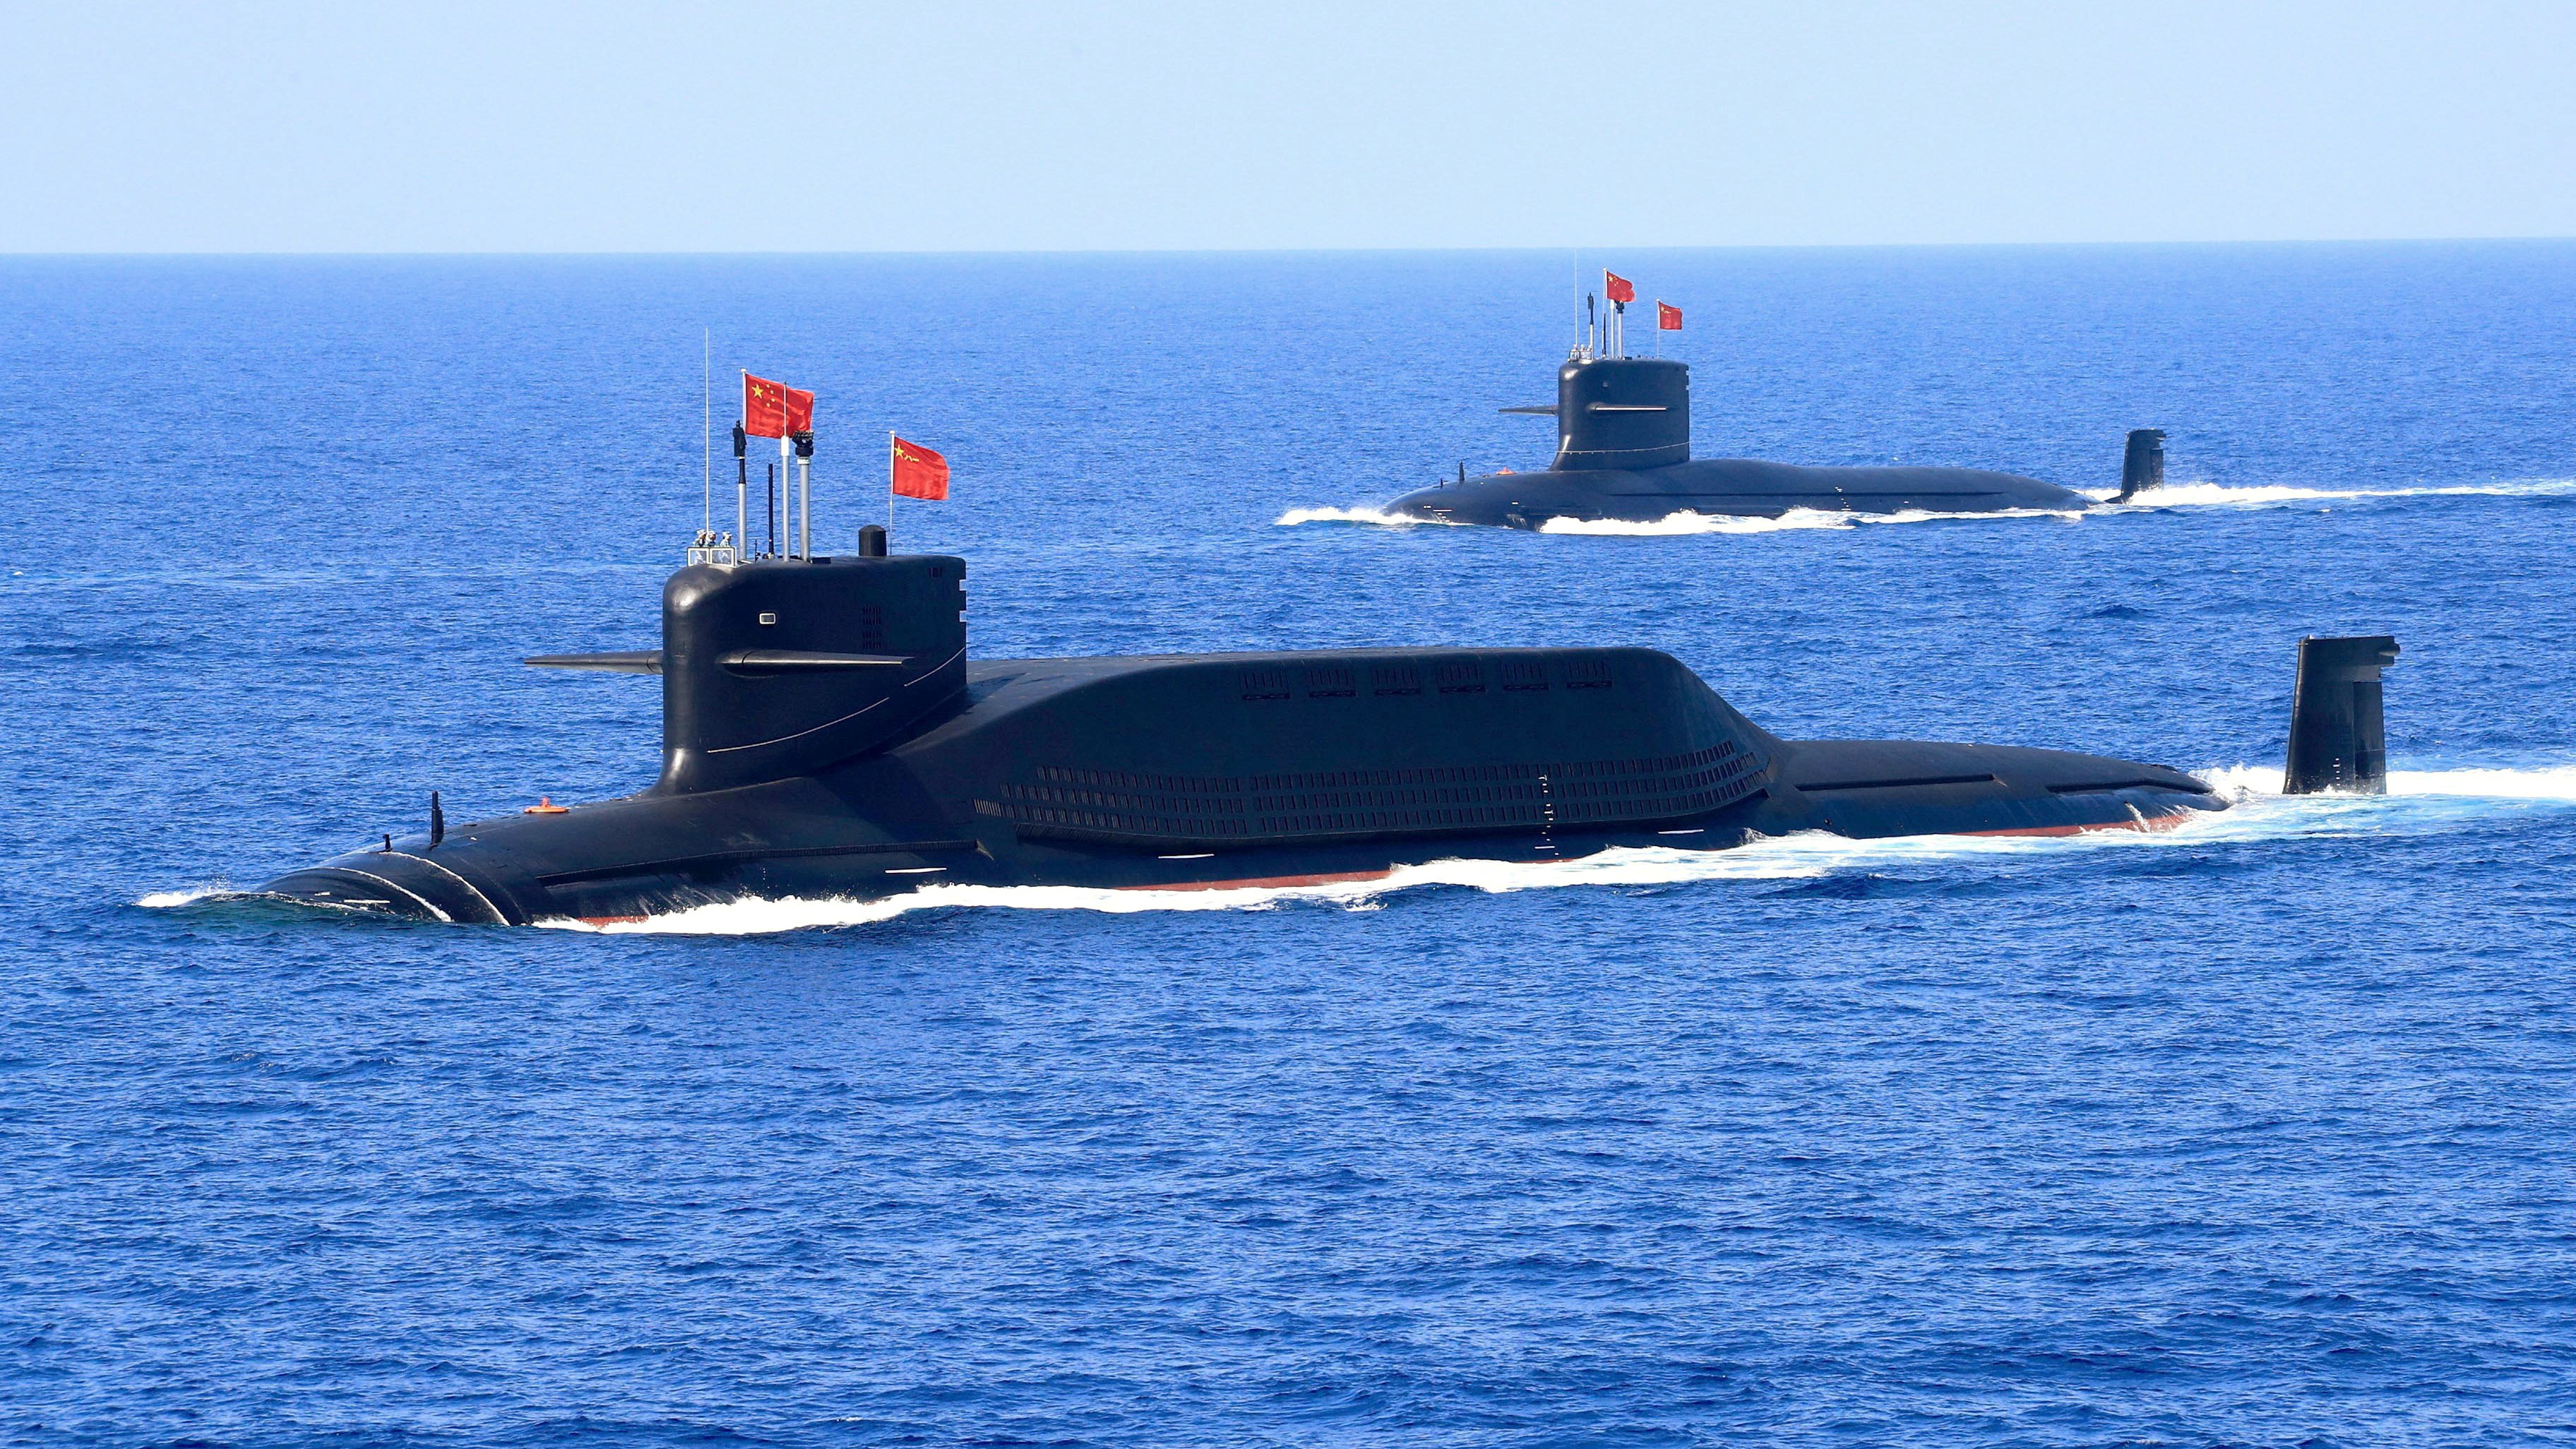 Jin class nuclear submarines of the People’s Liberation Army Navy during a military display in the South China Sea. The theoretical new vessels would be able to travel far faster using a submarine nuclear reactor